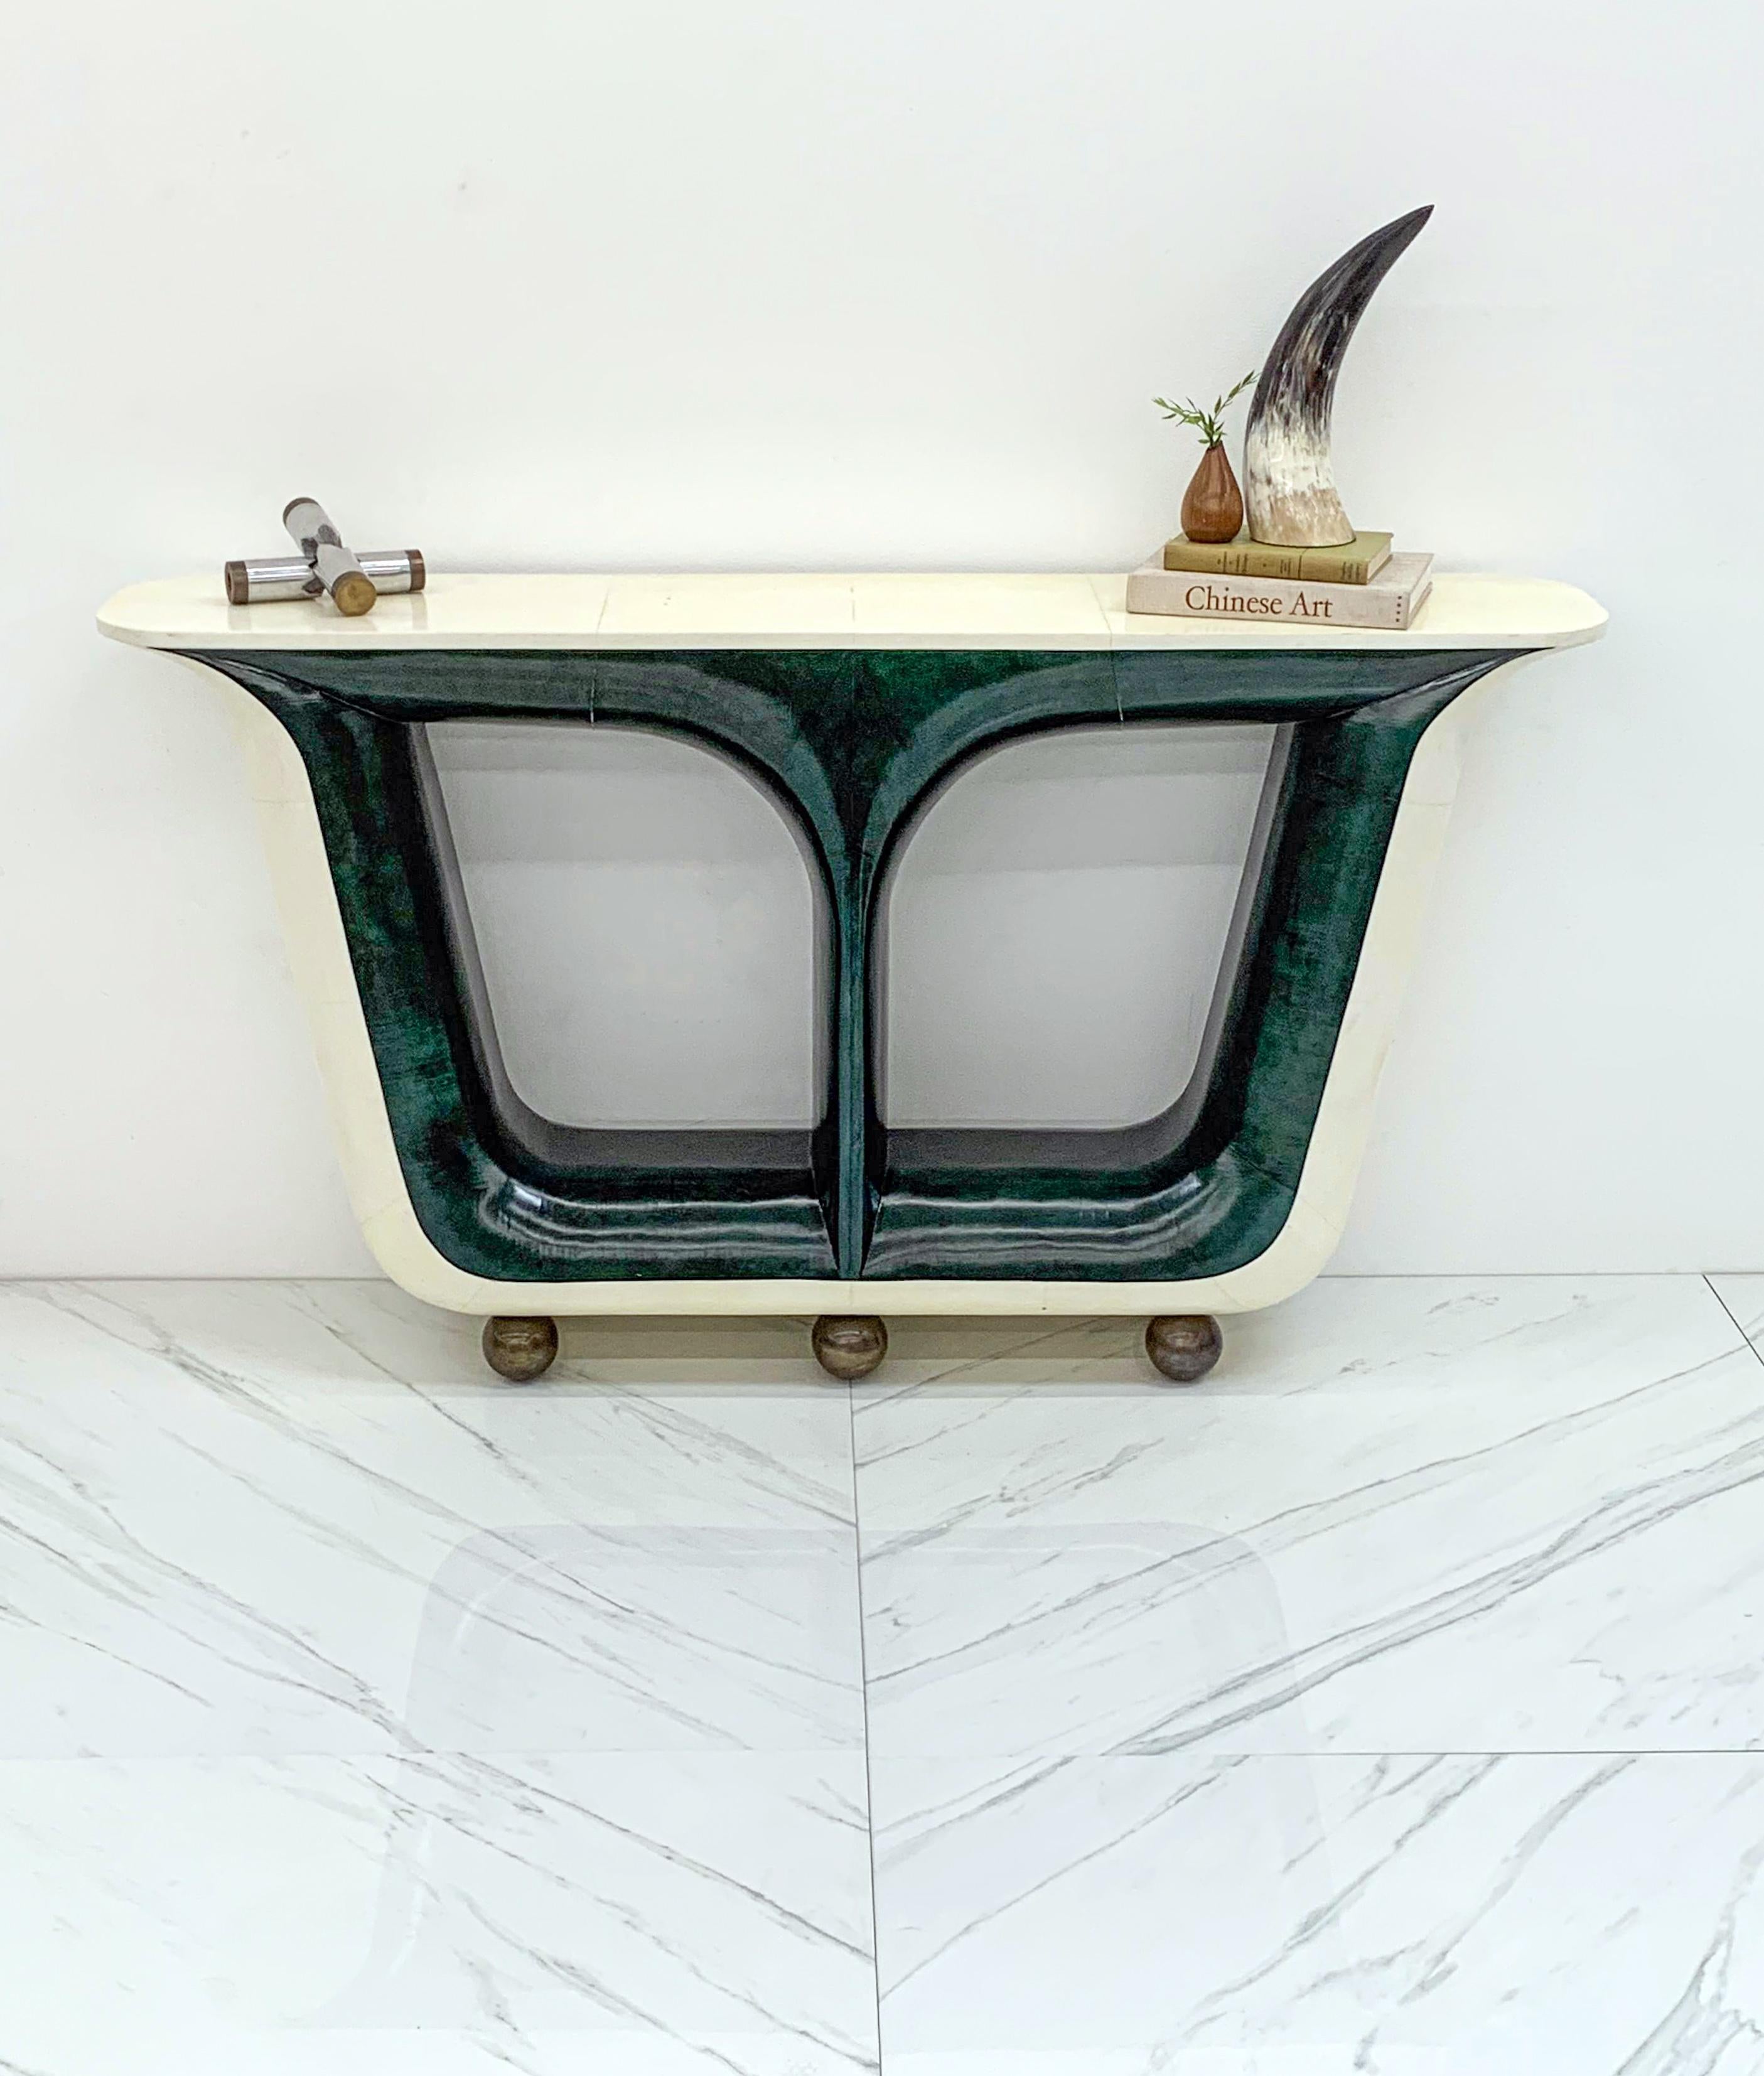 This console table is absolutely stunning. With emerald / malachite green lacquered goatskin and cream parchment, and bronze sphere legs this piece embodies high style deco luxury. This piece appears to have a makers mark branded / burnished onto